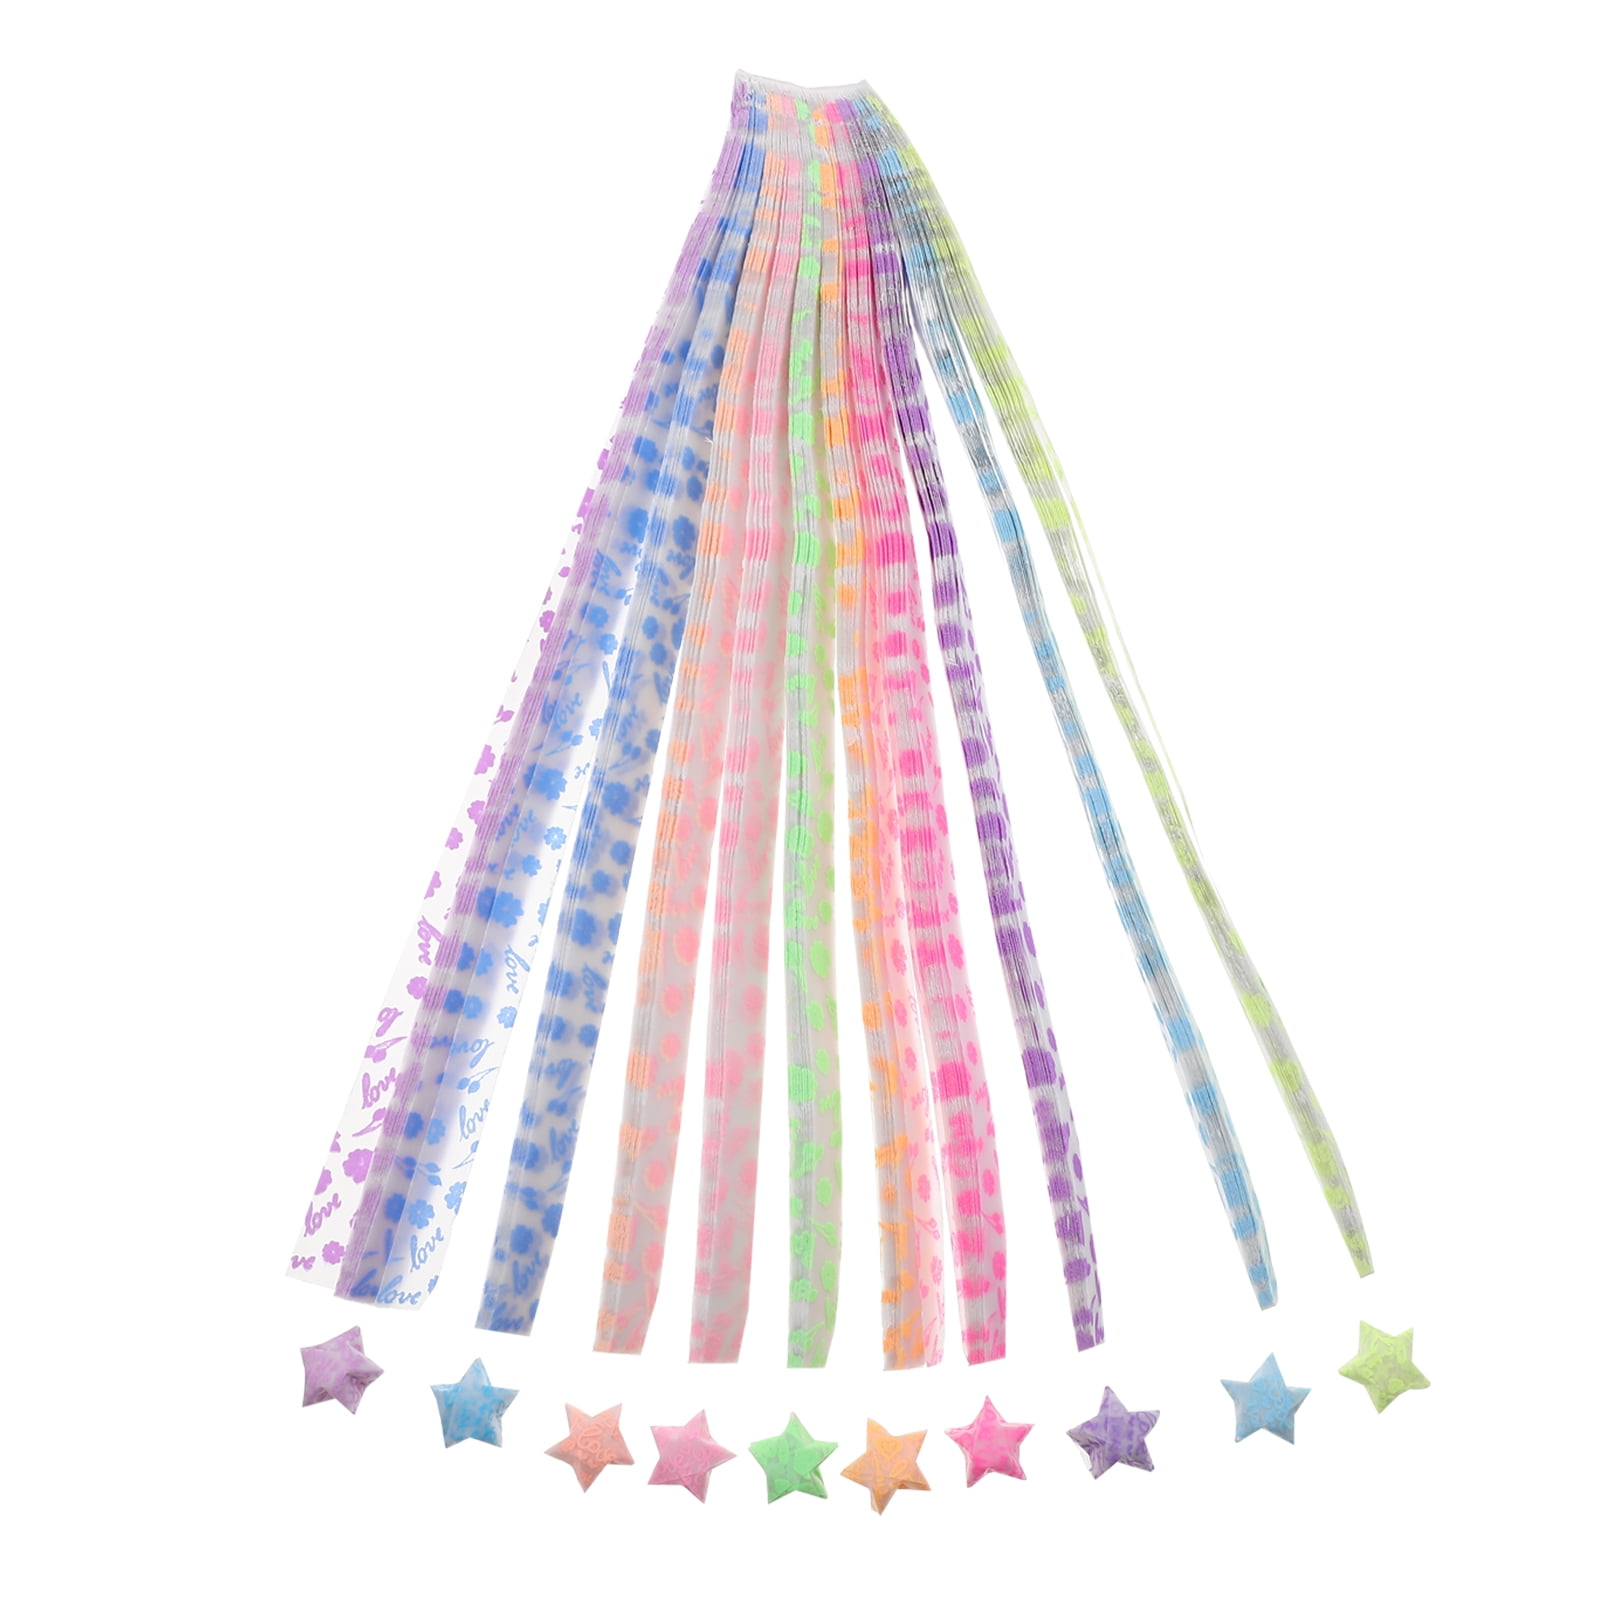 Origami Stars Papers 1,000 Paper Strips in Assorted Colors (9780804849395)